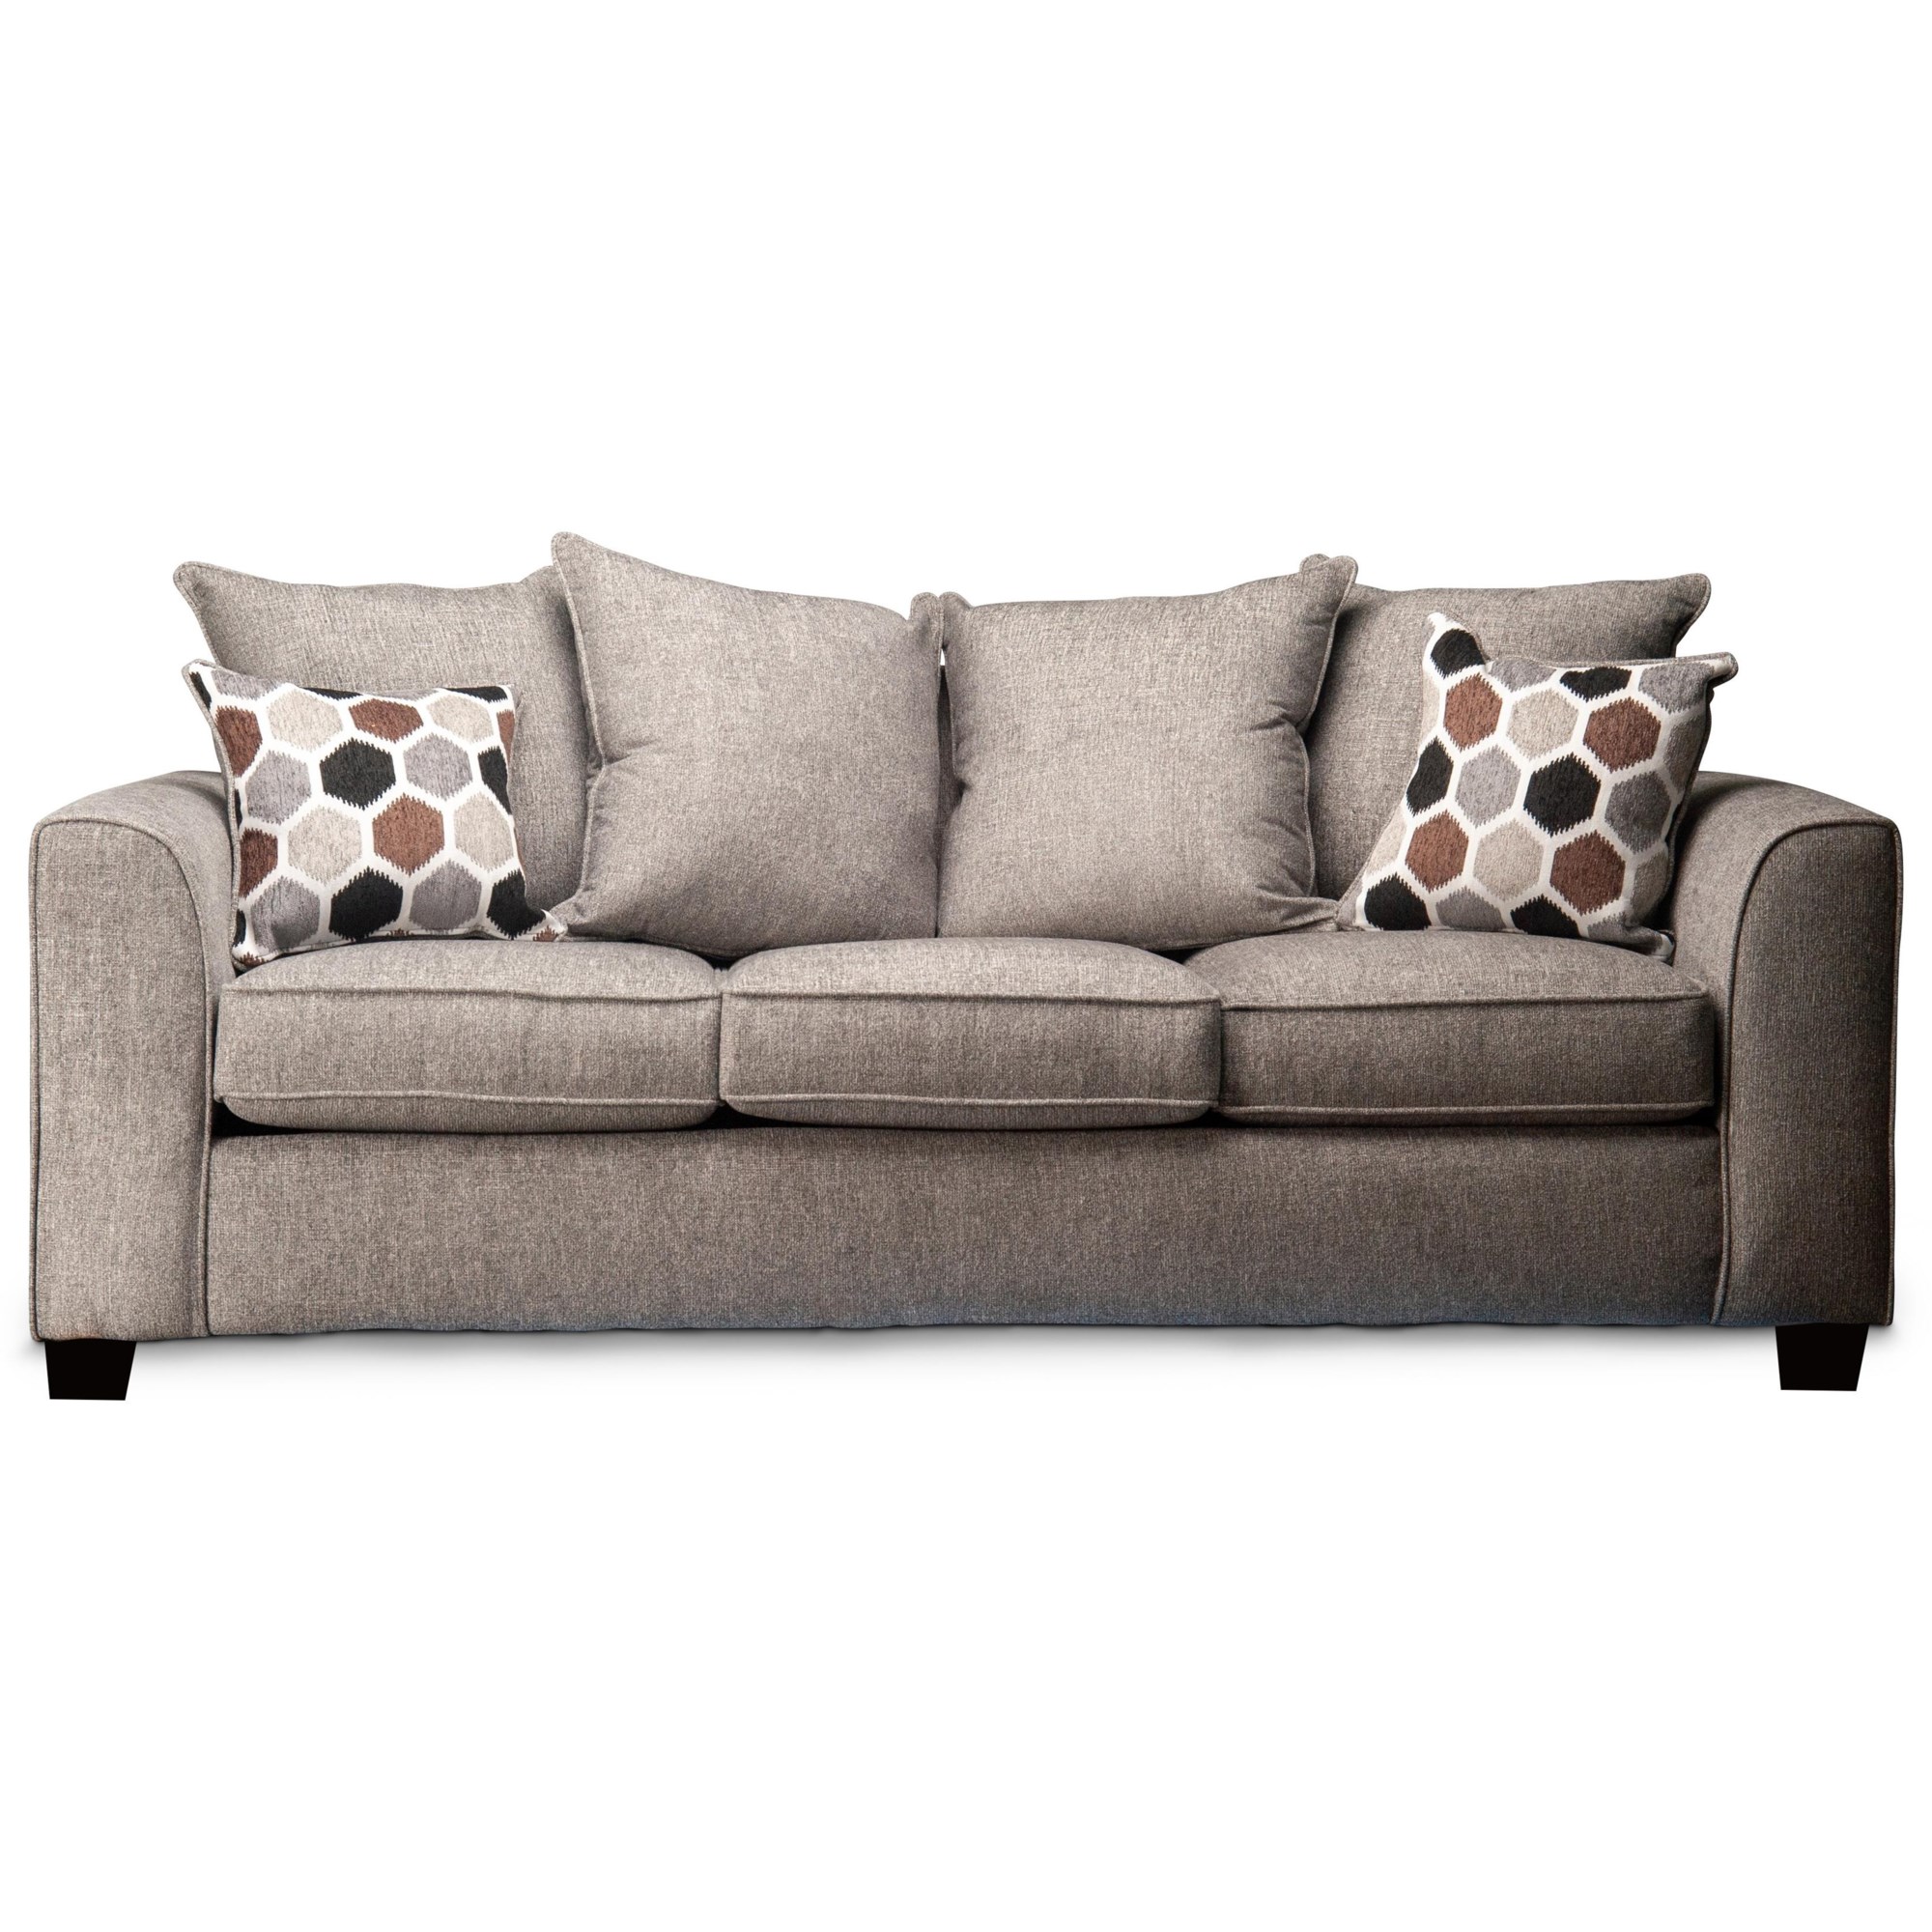 Peak Living Tripp 824422992 Sofa with Accent Pillows